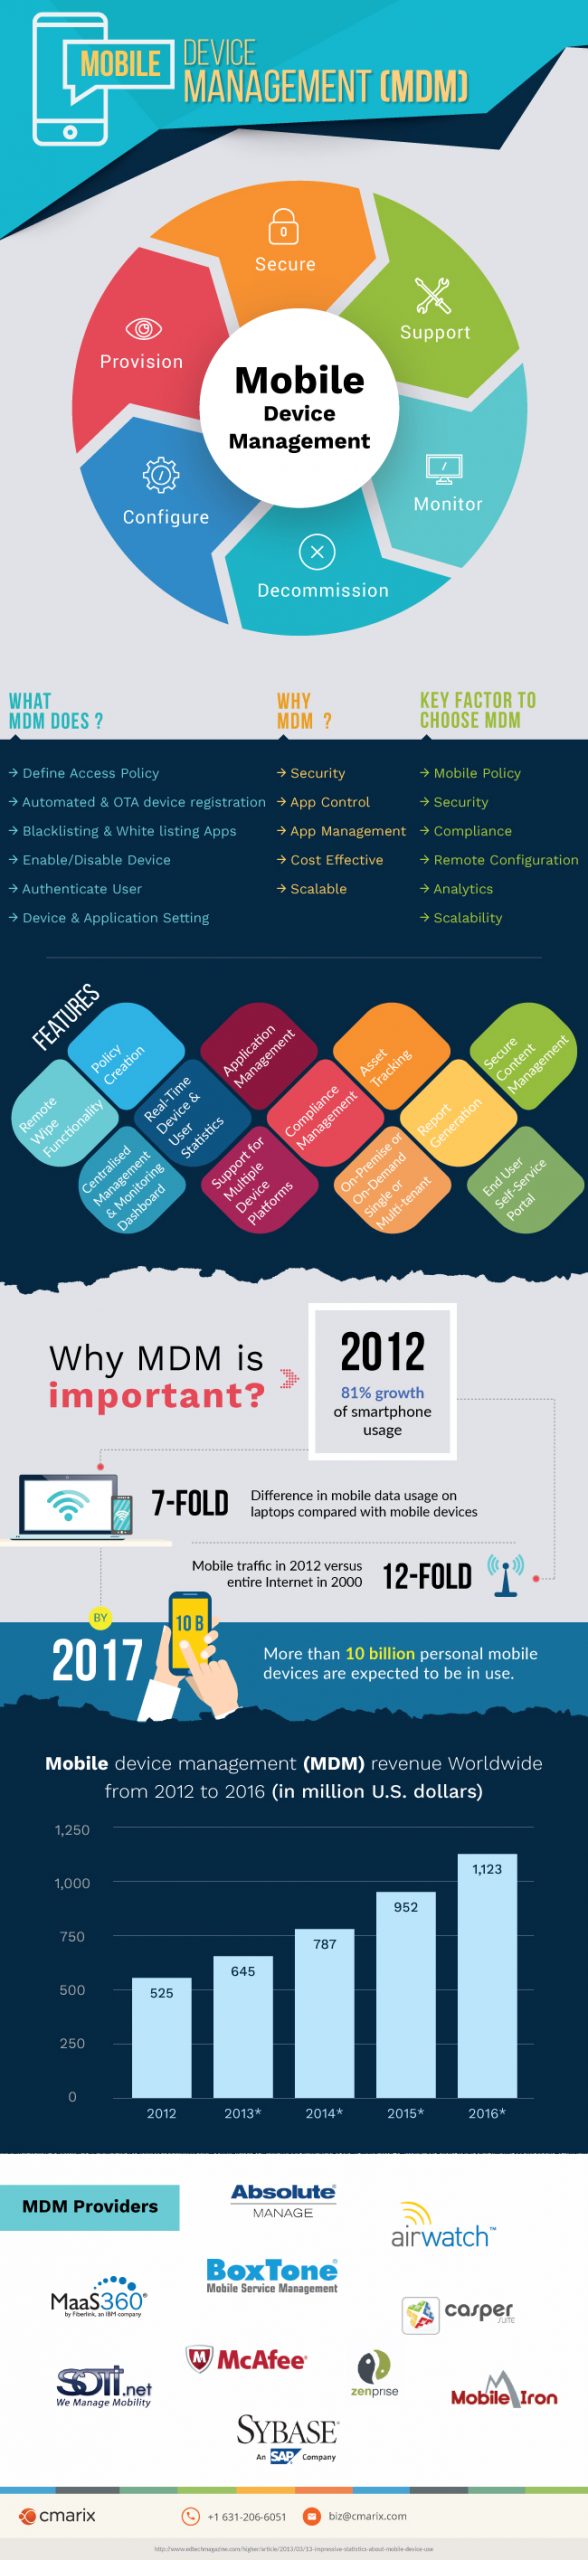 Infographics on Mobile Device Management